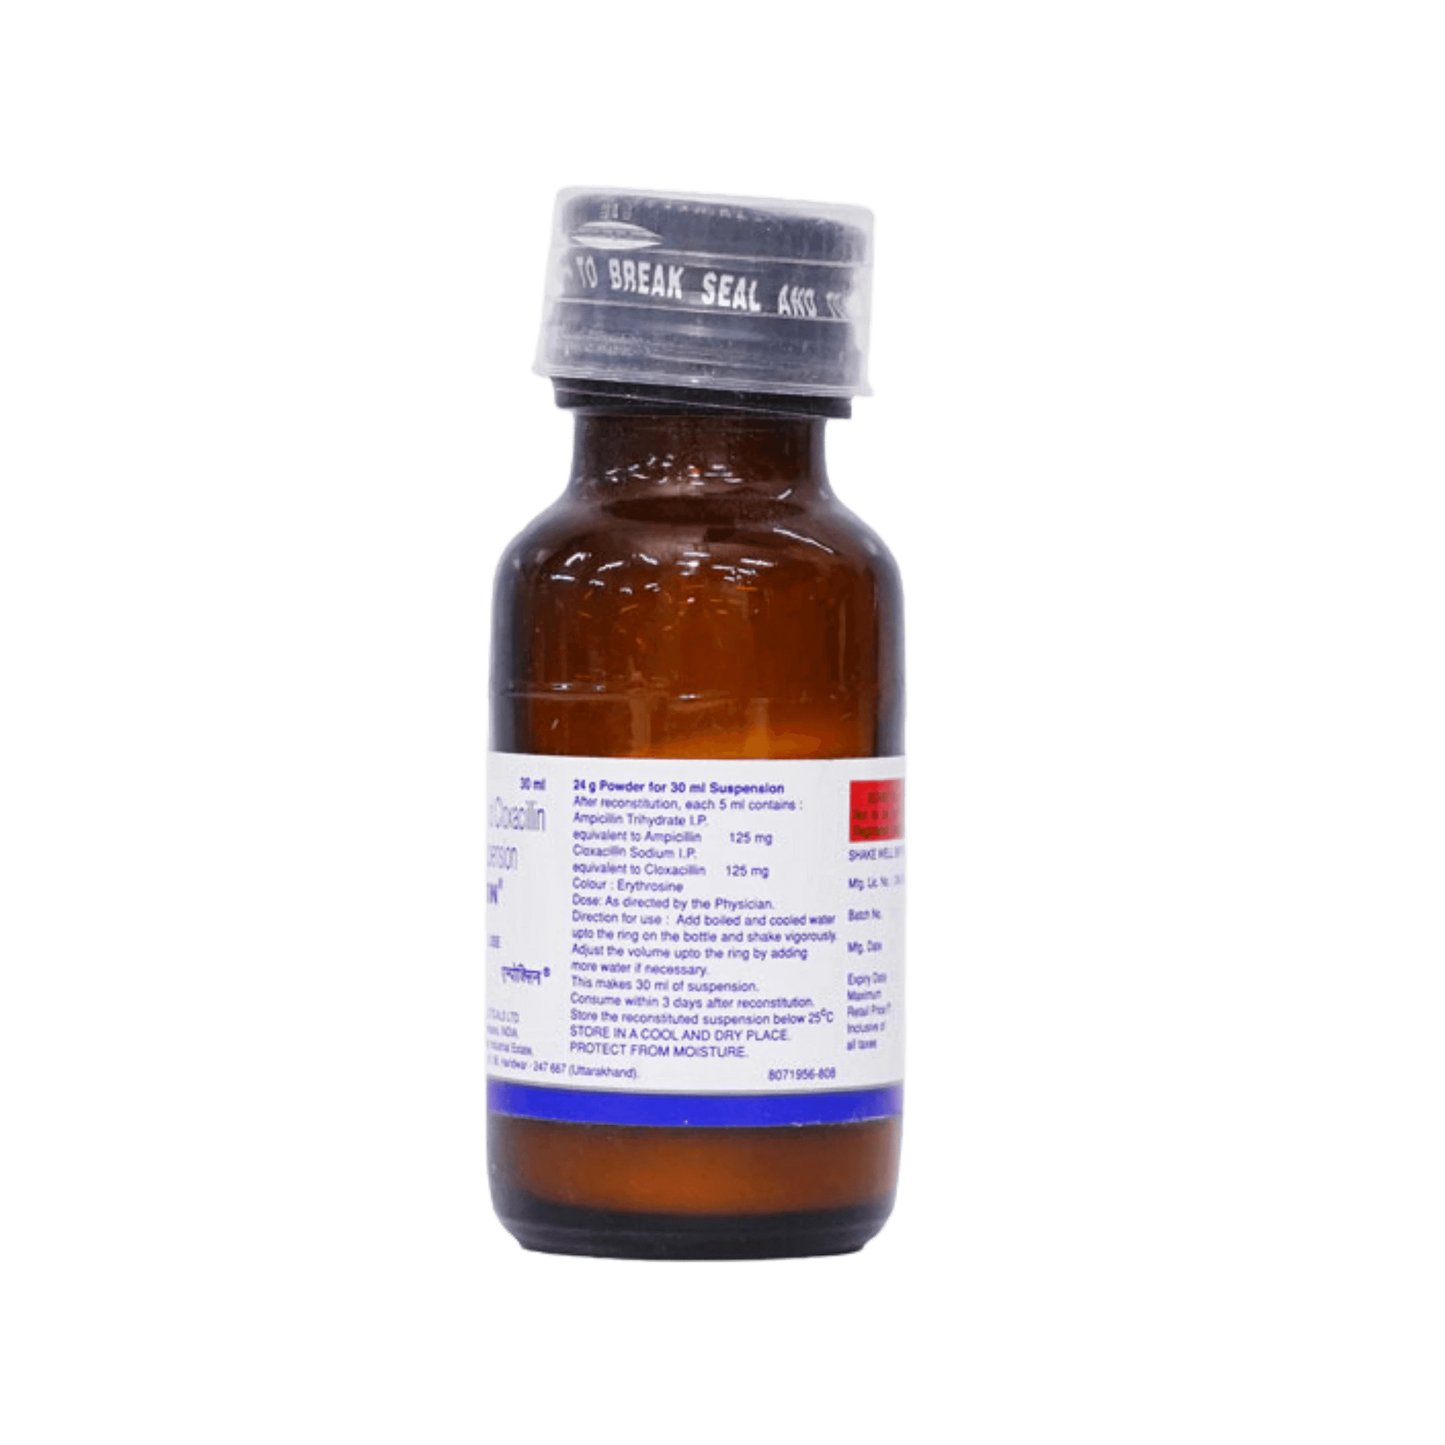 AMPOXIN DRY SYRUP 30ML